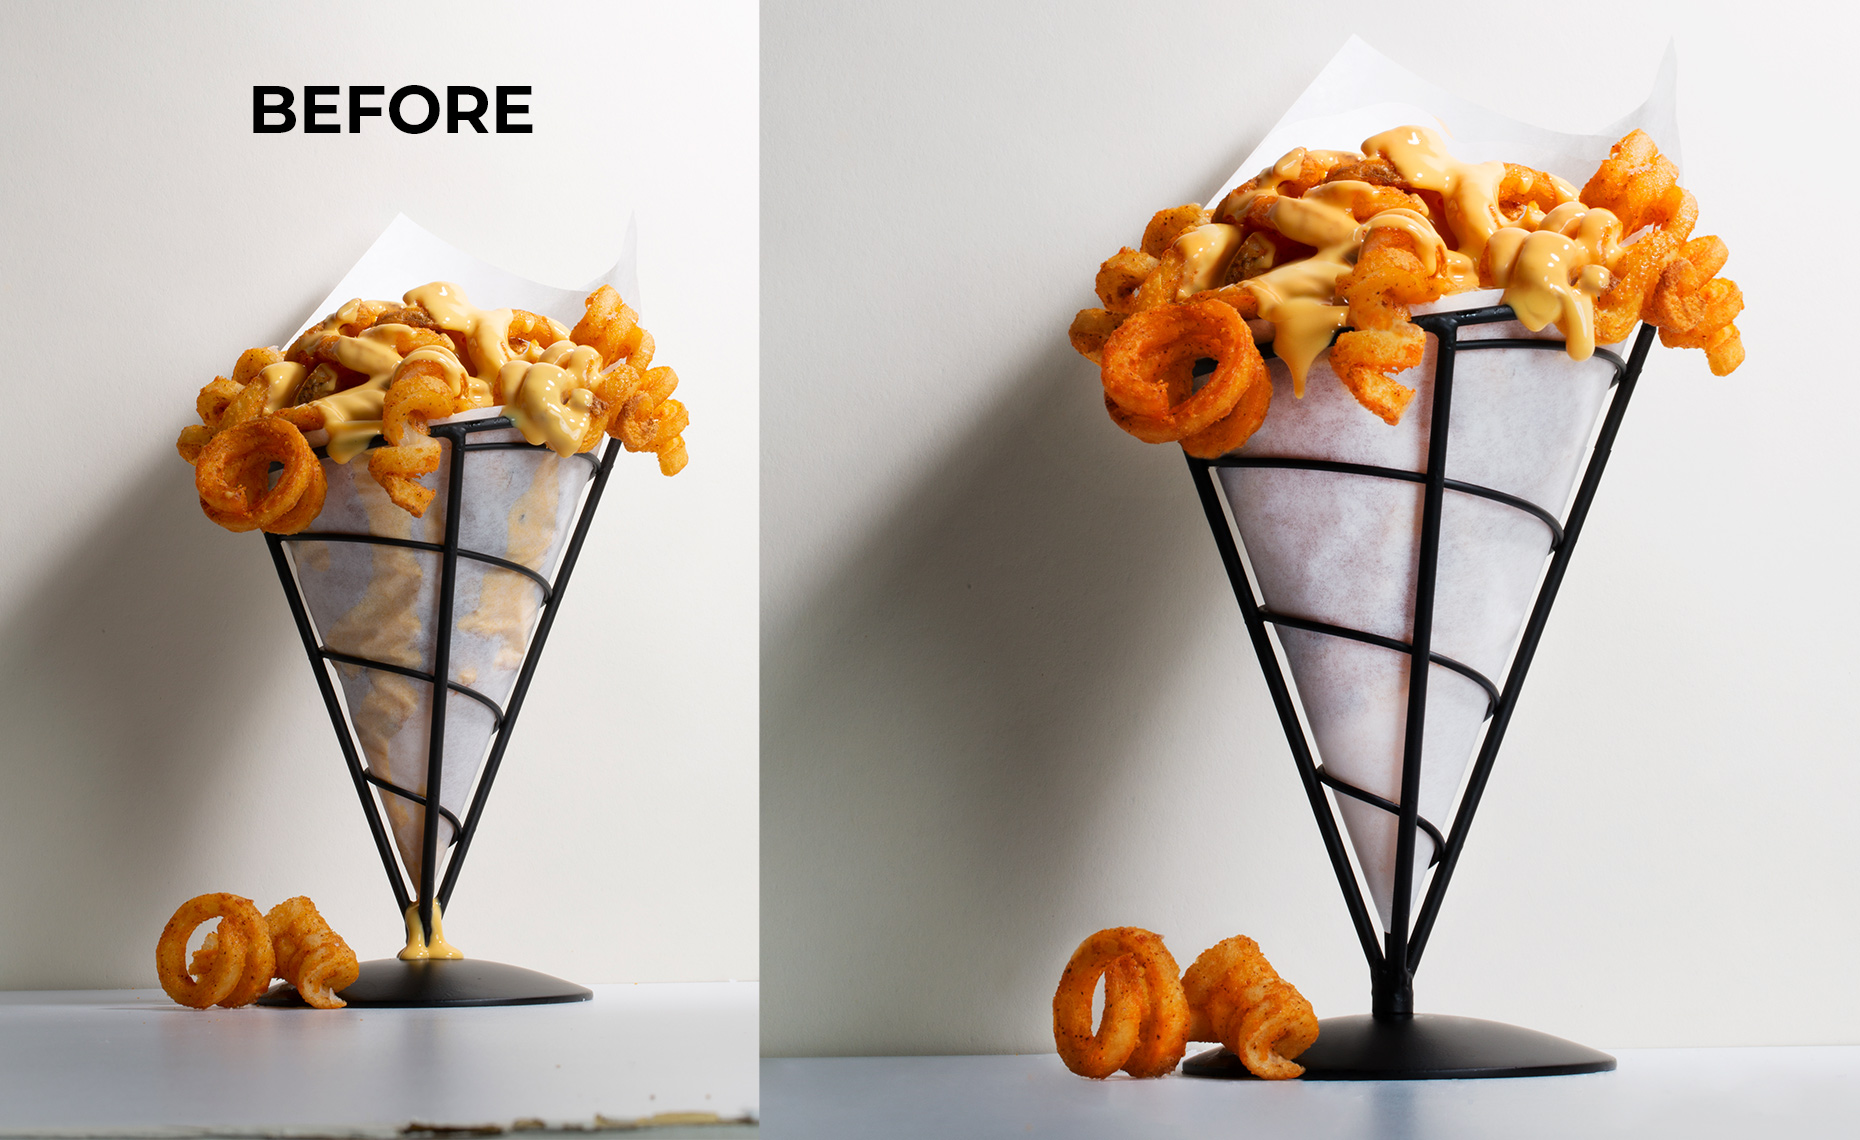 curley-fries-before-after